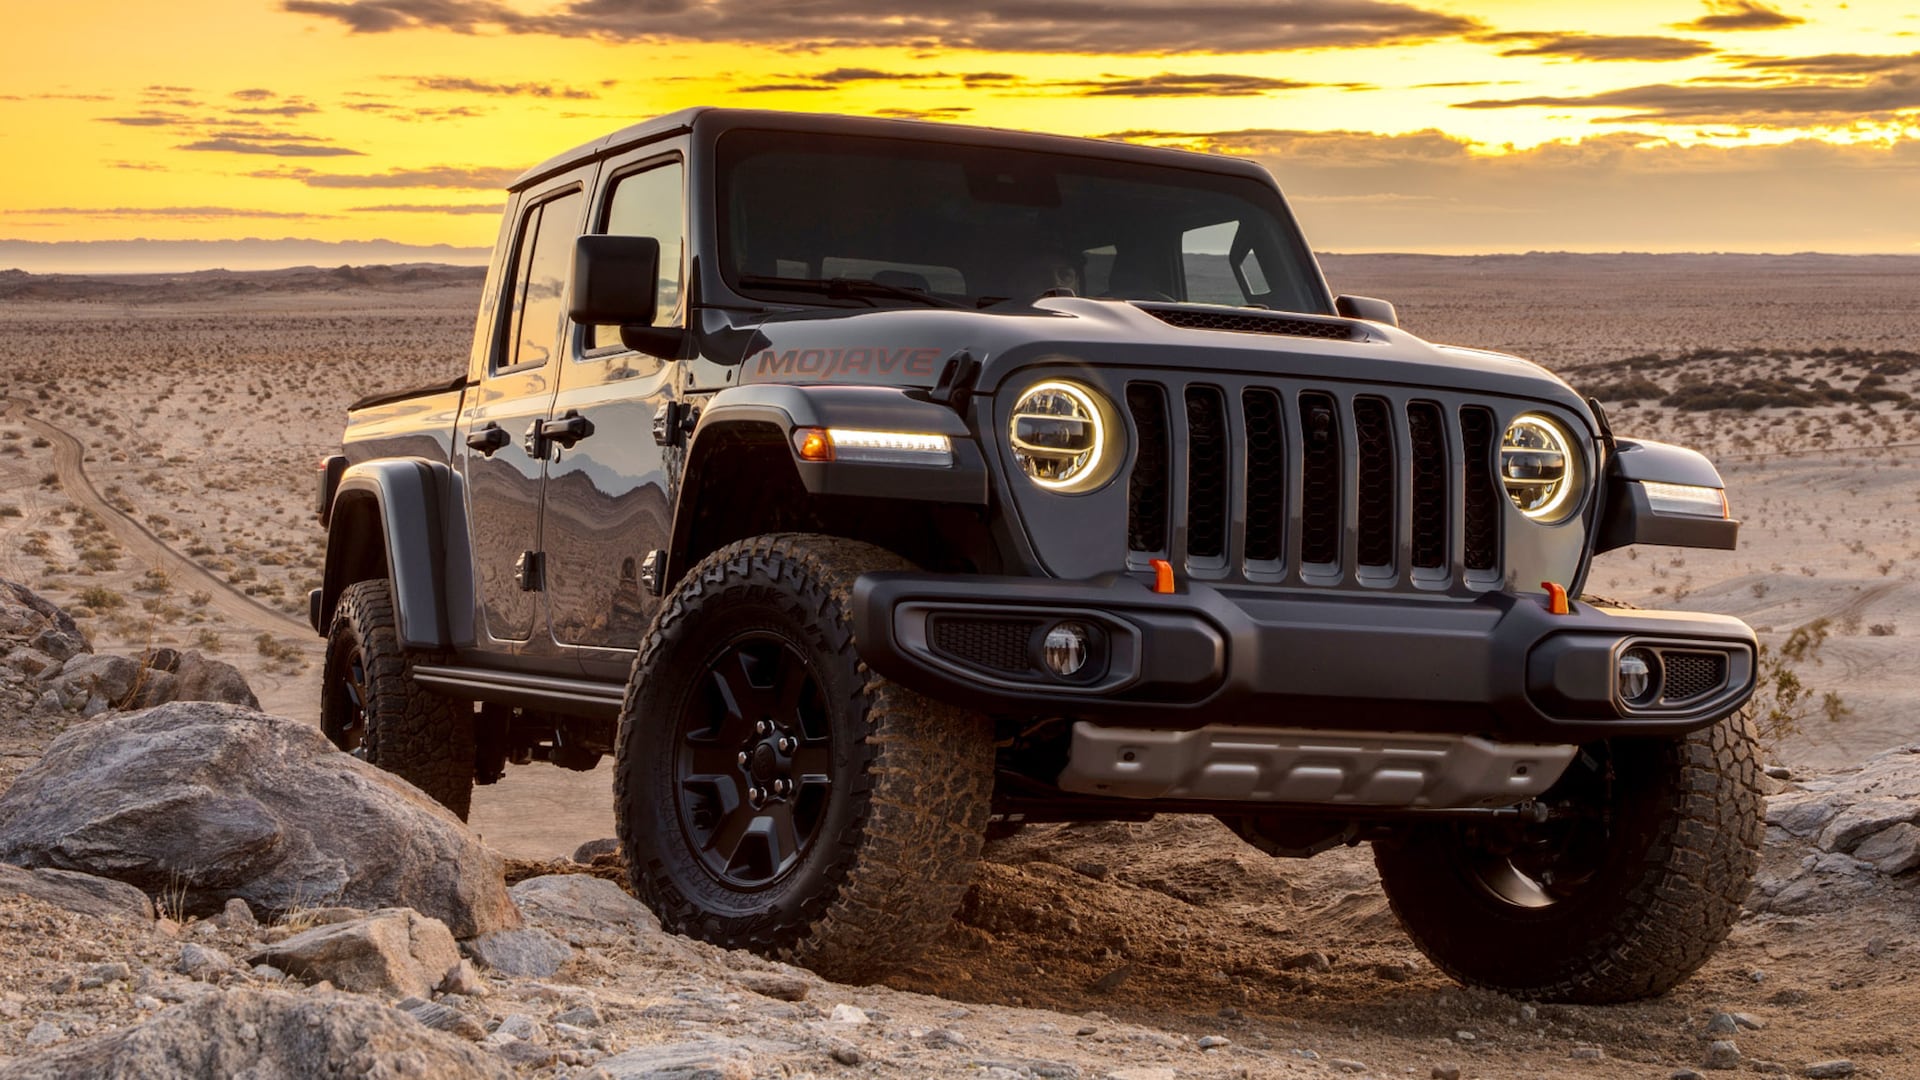 2022 Jeep Gladiator Prices, Reviews, and Photos - MotorTrend